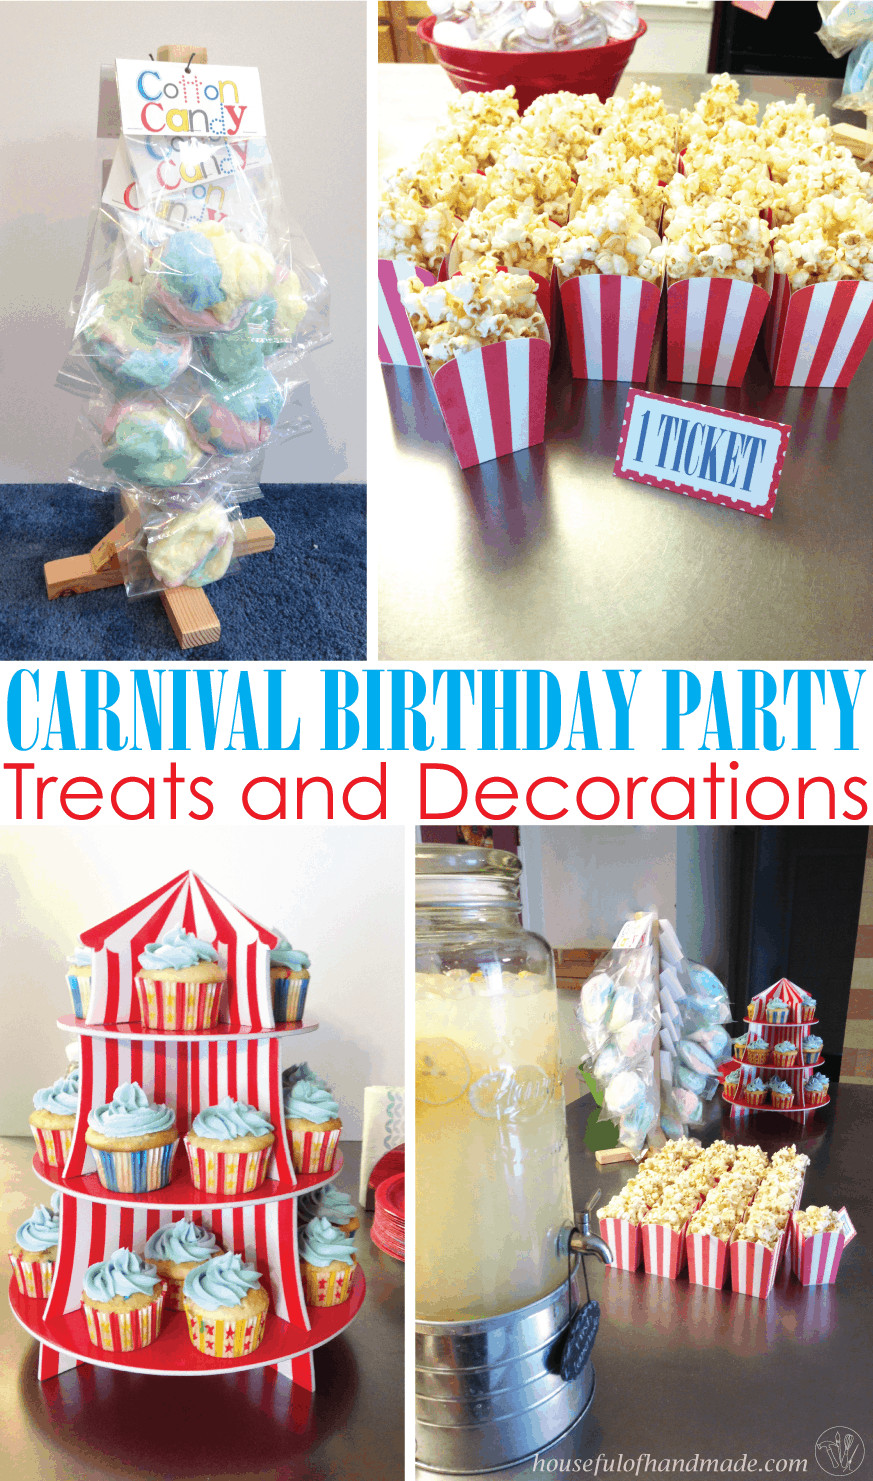 Birthday Party Ideas Decorations
 Carnival Birthday Party Part 2 Treats & Decorations